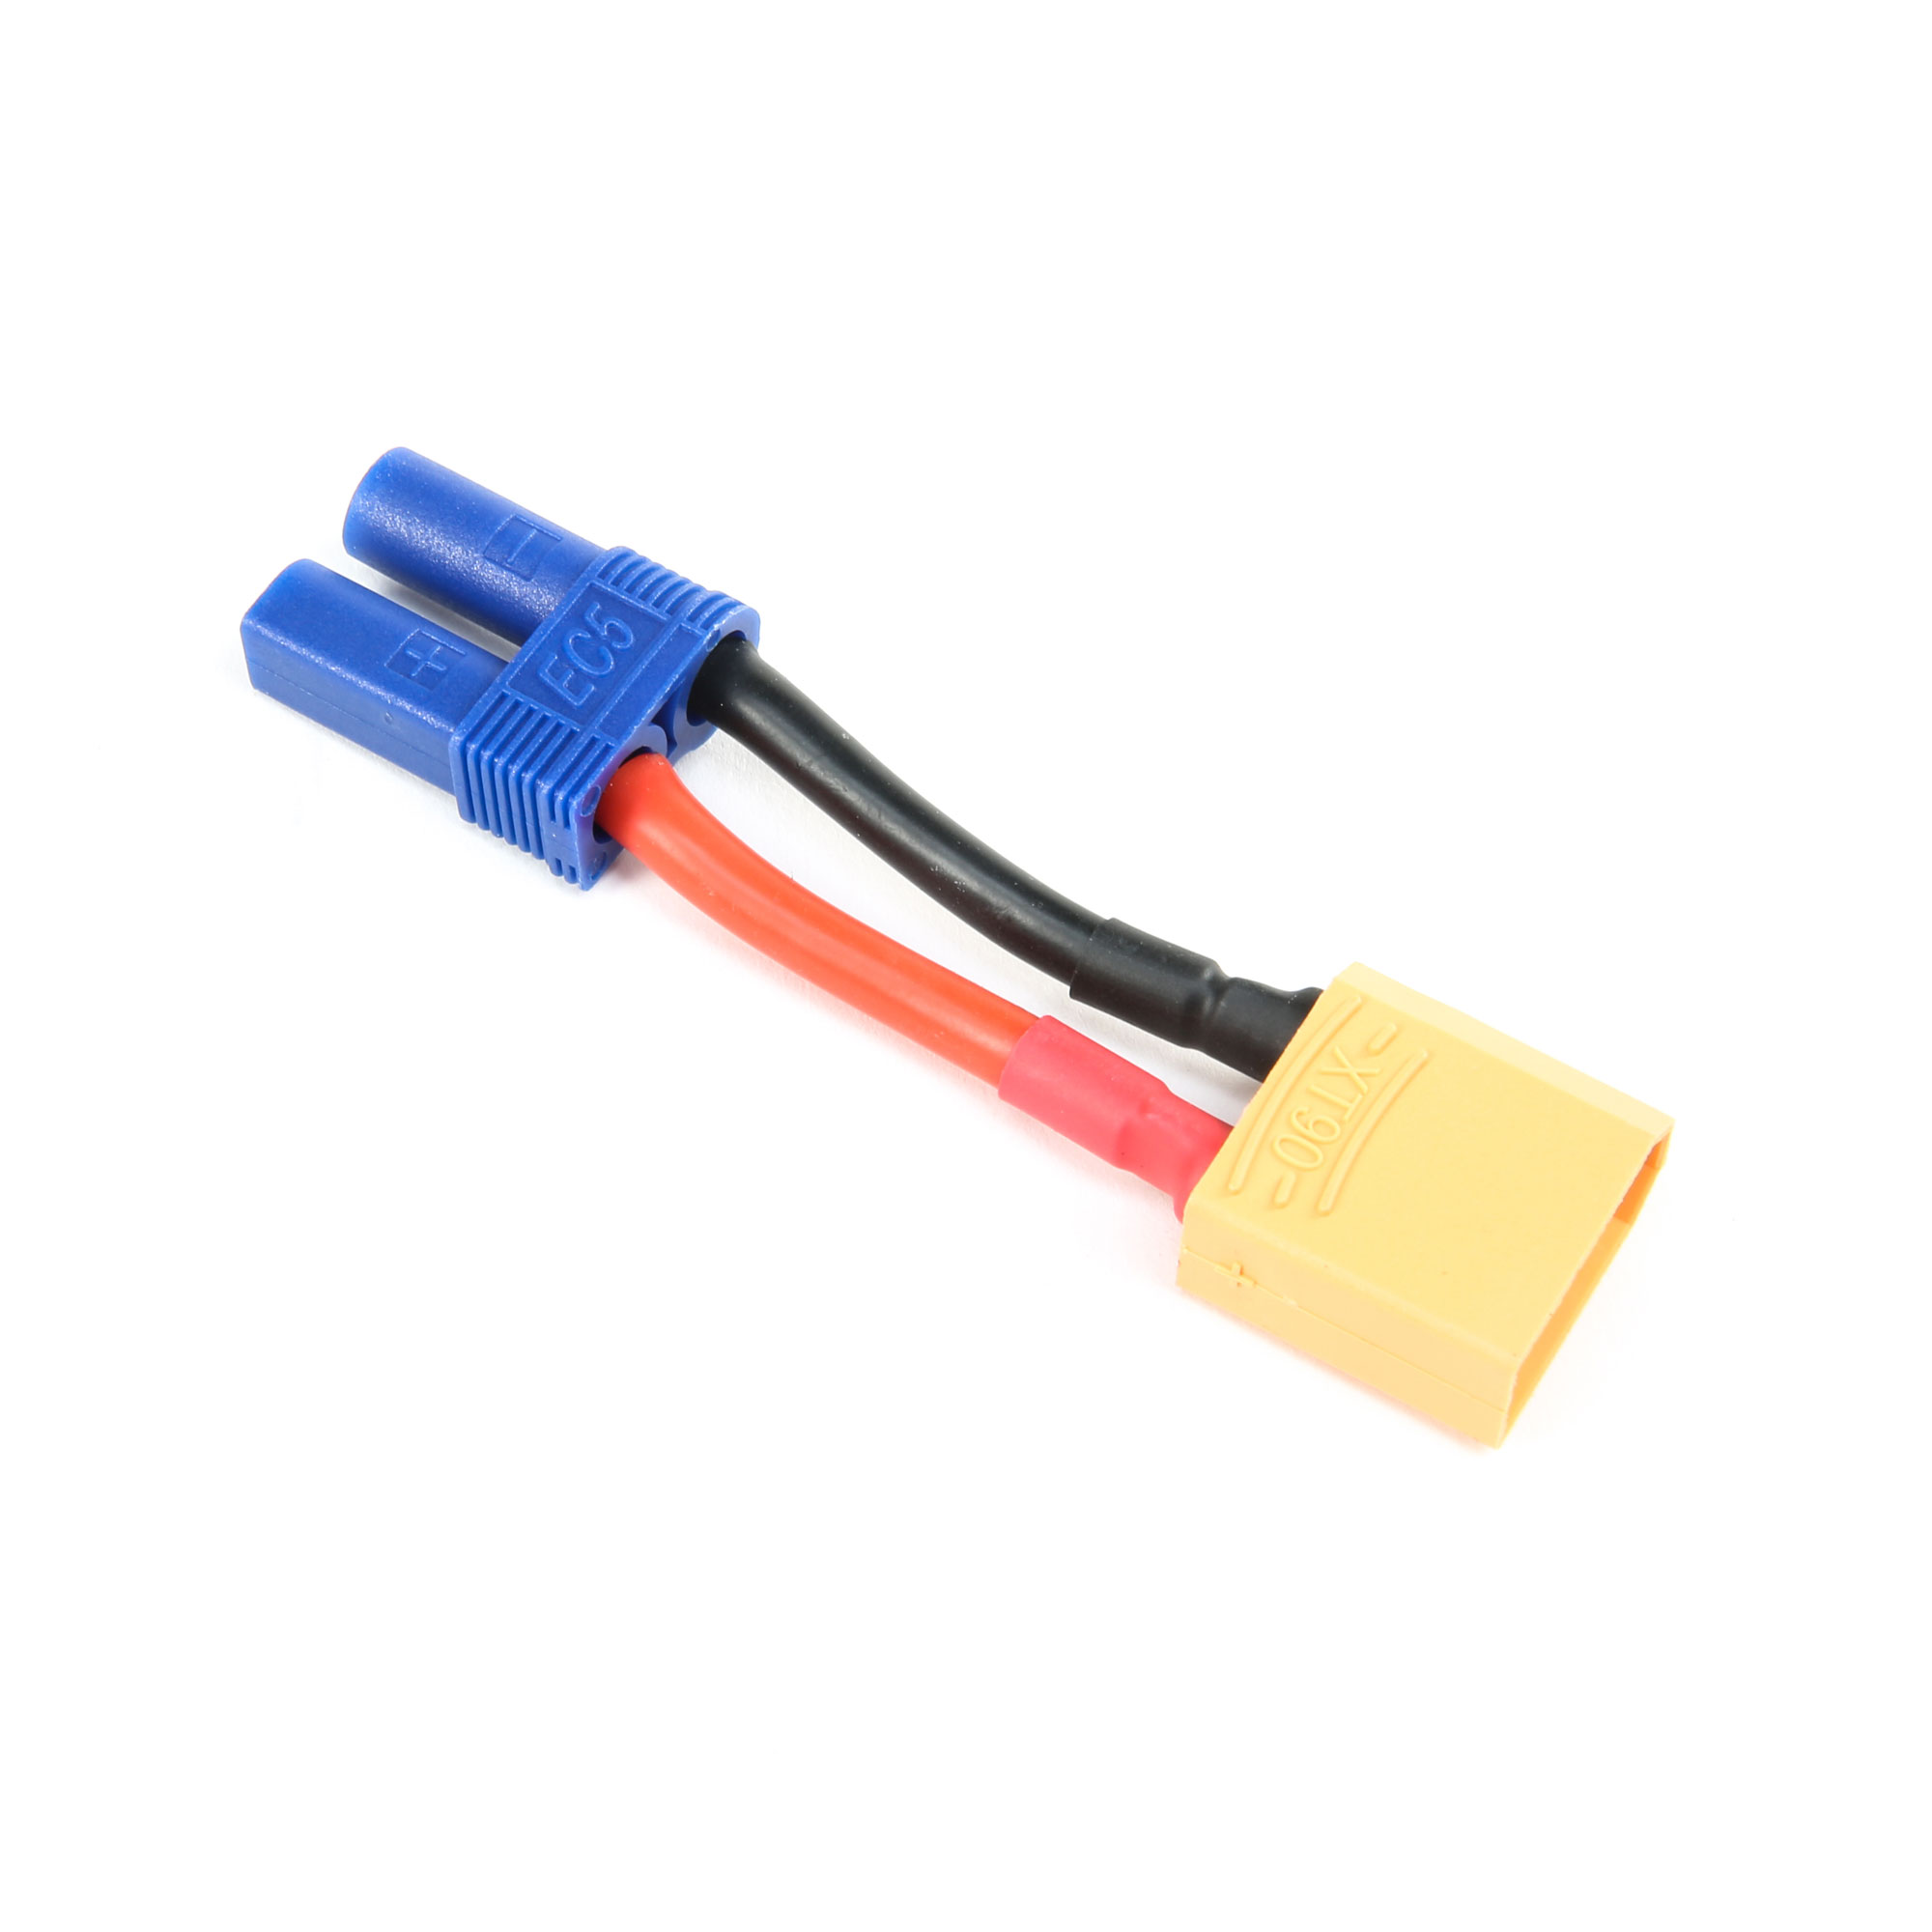 Dynamite Ec5 Device & Battery Connector DYNC0023 for sale online